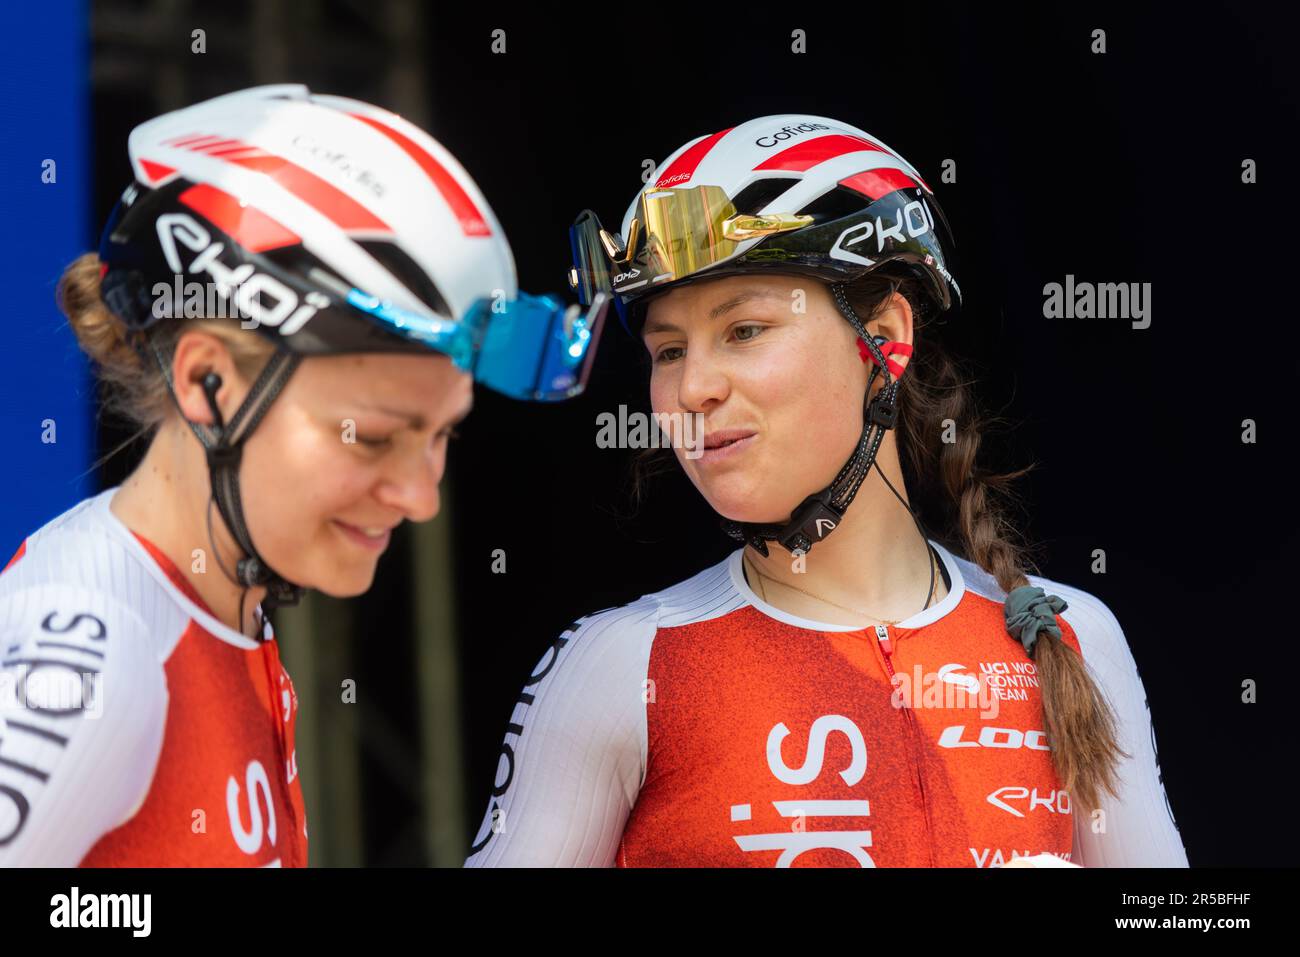 Cofidis Women Team riders at Classique UCI Women's WorldTour road race Stage 3, 2023 Ford RideLondon. Victoire Berteau, Gabrielle Pilote Fortin Stock Photo